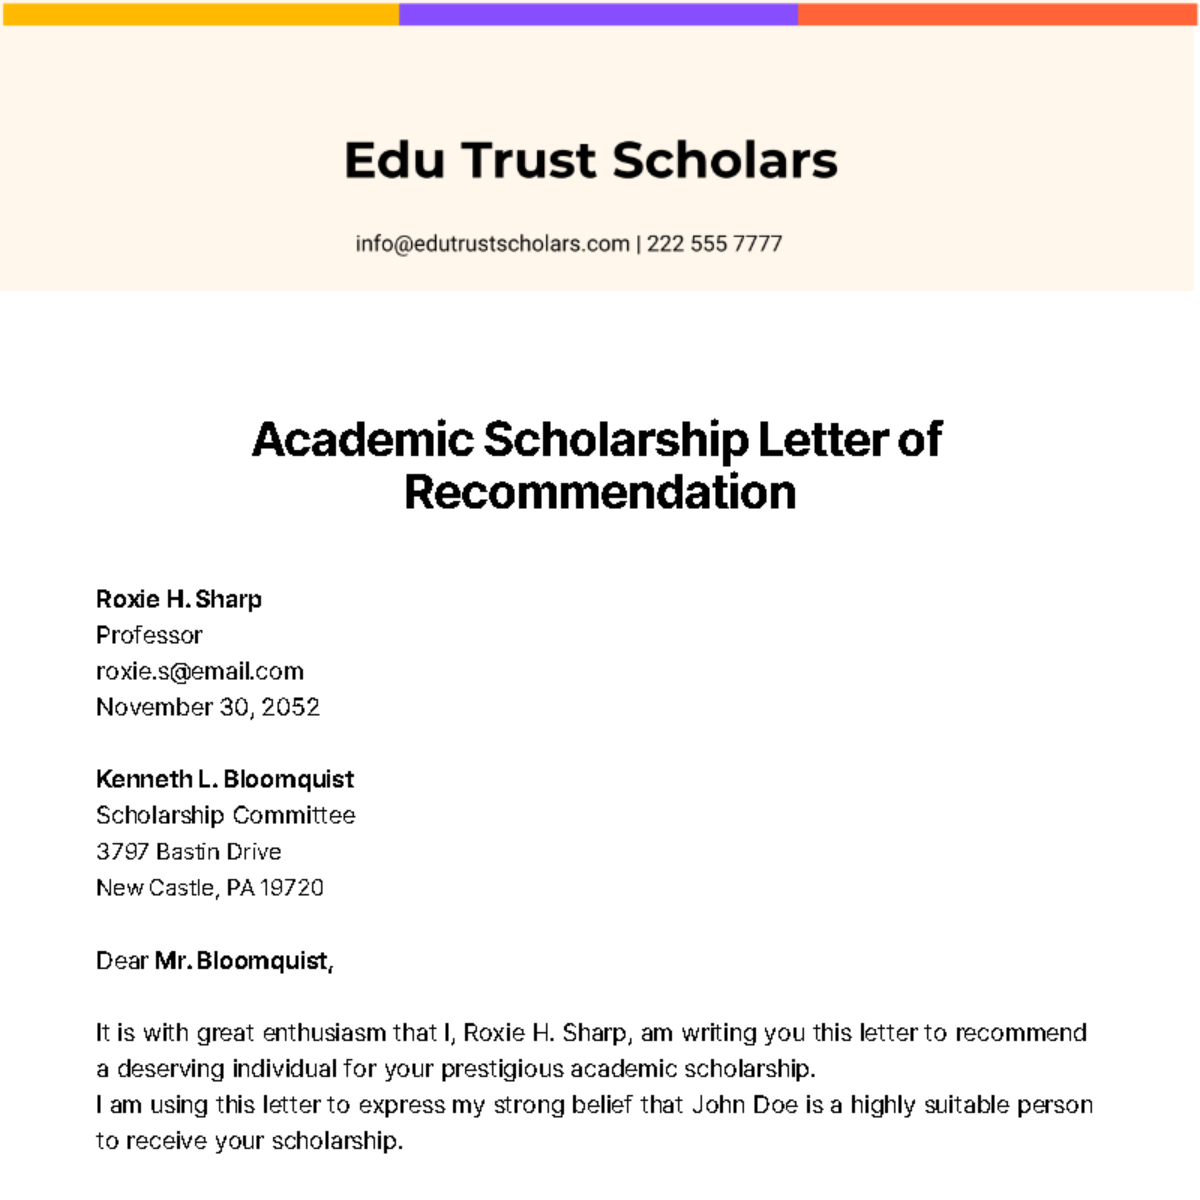 Academic Scholarship Letter of Recommendation Template